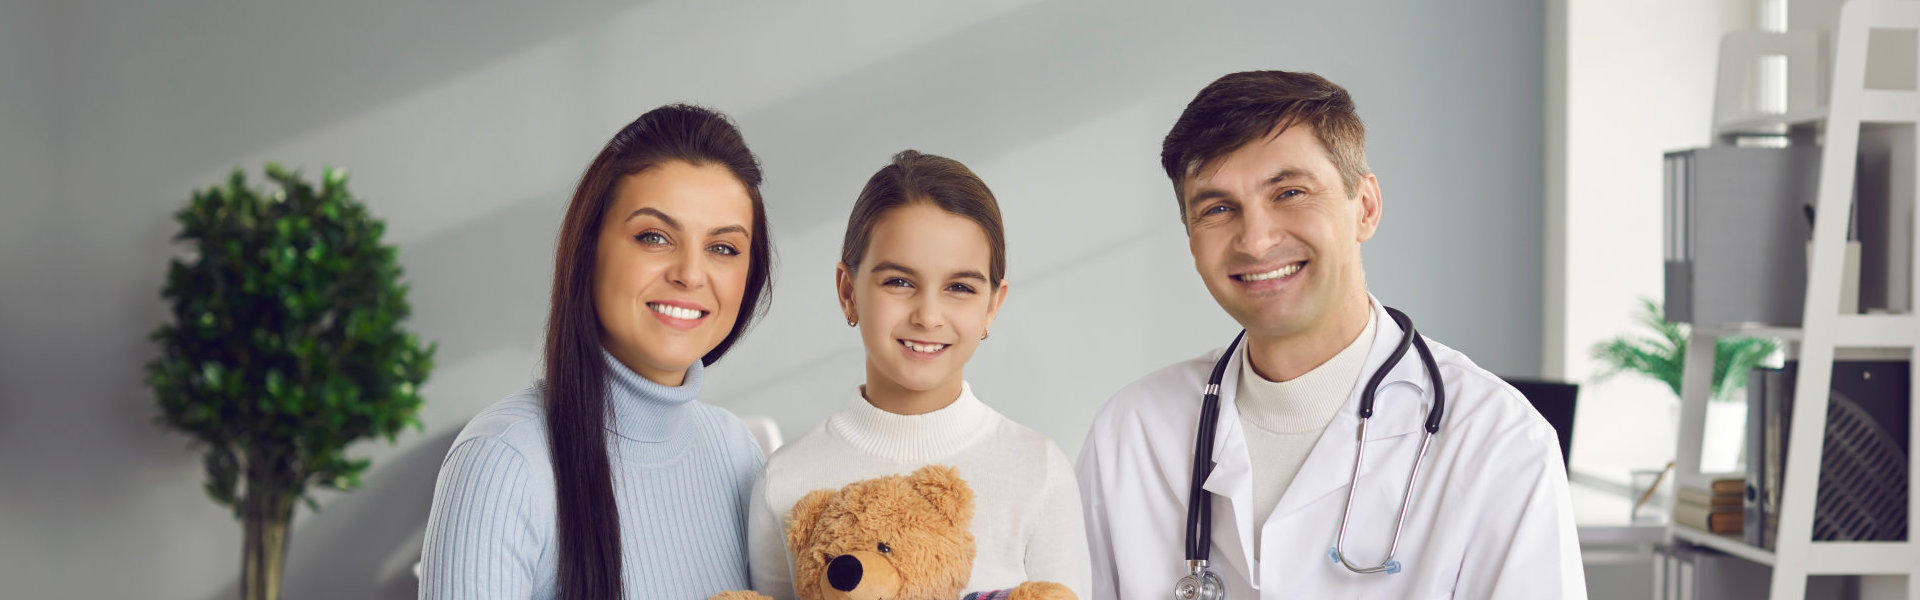 Happy parent and kid trust their doctor. Portrait of smiling mother, child and family practitioner. Mum, daughter with teddy bear, and friendly pediatrician with stethoscope looking at camera together